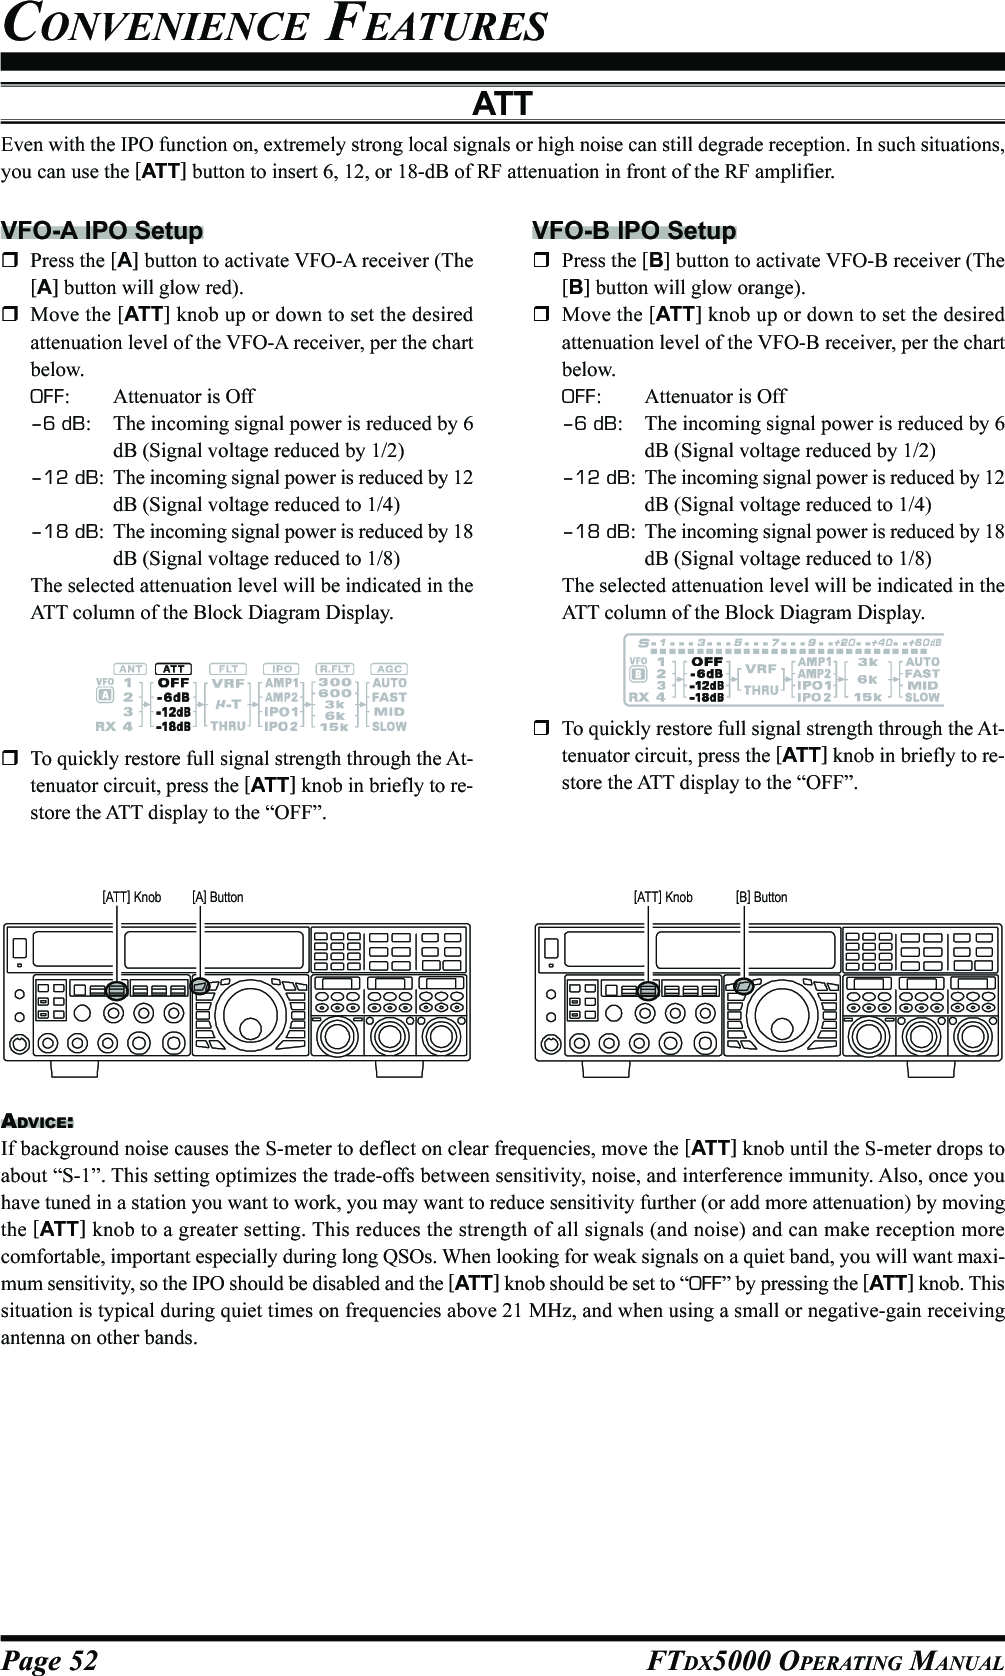 Page 52 FTDX5000 OPERATING MANUALATTEven with the IPO function on, extremely strong local signals or high noise can still degrade reception. In such situations,you can use the [ATT] button to insert 6, 12, or 18-dB of RF attenuation in front of the RF amplifier.VFO-A IPO SetupPress the [A] button to activate VFO-A receiver (The[A] button will glow red).Move the [ATT] knob up or down to set the desiredattenuation level of the VFO-A receiver, per the chartbelow.OFF: Attenuator is Off–6 dB: The incoming signal power is reduced by 6dB (Signal voltage reduced by 1/2)–12 dB: The incoming signal power is reduced by 12dB (Signal voltage reduced to 1/4)–18 dB: The incoming signal power is reduced by 18dB (Signal voltage reduced to 1/8)The selected attenuation level will be indicated in theATT column of the Block Diagram Display.VFO-B IPO SetupPress the [B] button to activate VFO-B receiver (The[B] button will glow orange).Move the [ATT] knob up or down to set the desiredattenuation level of the VFO-B receiver, per the chartbelow.OFF: Attenuator is Off–6 dB: The incoming signal power is reduced by 6dB (Signal voltage reduced by 1/2)–12 dB: The incoming signal power is reduced by 12dB (Signal voltage reduced to 1/4)–18 dB: The incoming signal power is reduced by 18dB (Signal voltage reduced to 1/8)The selected attenuation level will be indicated in theATT column of the Block Diagram Display.ADVICE:If background noise causes the S-meter to deflect on clear frequencies, move the [ATT] knob until the S-meter drops toabout “S-1”. This setting optimizes the trade-offs between sensitivity, noise, and interference immunity. Also, once youhave tuned in a station you want to work, you may want to reduce sensitivity further (or add more attenuation) by movingthe [ATT] knob to a greater setting. This reduces the strength of all signals (and noise) and can make reception morecomfortable, important especially during long QSOs. When looking for weak signals on a quiet band, you will want maxi-mum sensitivity, so the IPO should be disabled and the [ATT] knob should be set to “OFF” by pressing the [ATT] knob. Thissituation is typical during quiet times on frequencies above 21 MHz, and when using a small or negative-gain receivingantenna on other bands.To quickly restore full signal strength through the At-tenuator circuit, press the [ATT] knob in briefly to re-store the ATT display to the “OFF”.To quickly restore full signal strength through the At-tenuator circuit, press the [ATT] knob in briefly to re-store the ATT display to the “OFF”.[A] Button[ATT] Knob [B] Button[ATT] KnobCONVENIENCE FEATURES